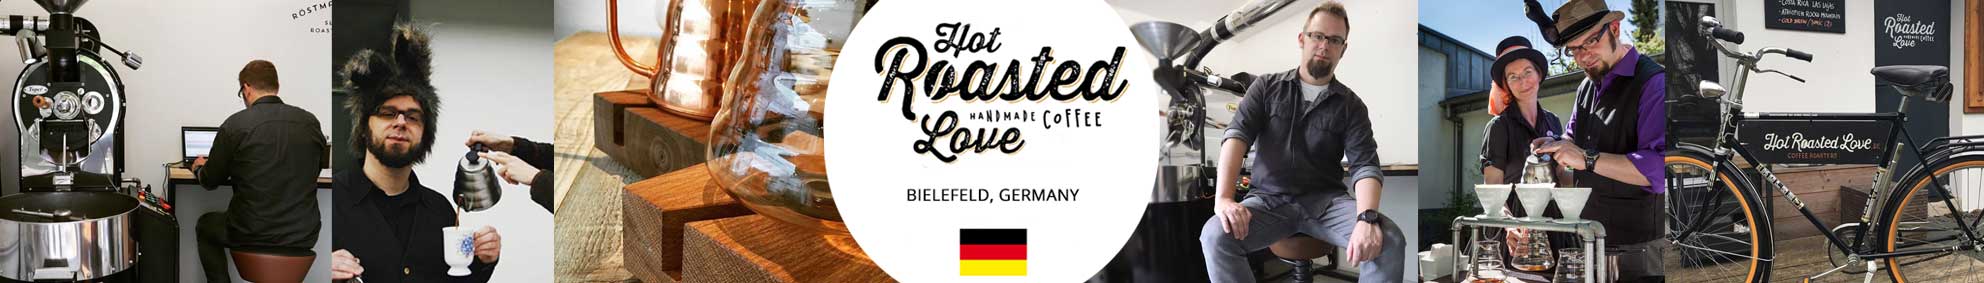 Hot Roasted Love Speciality Coffee Roasters